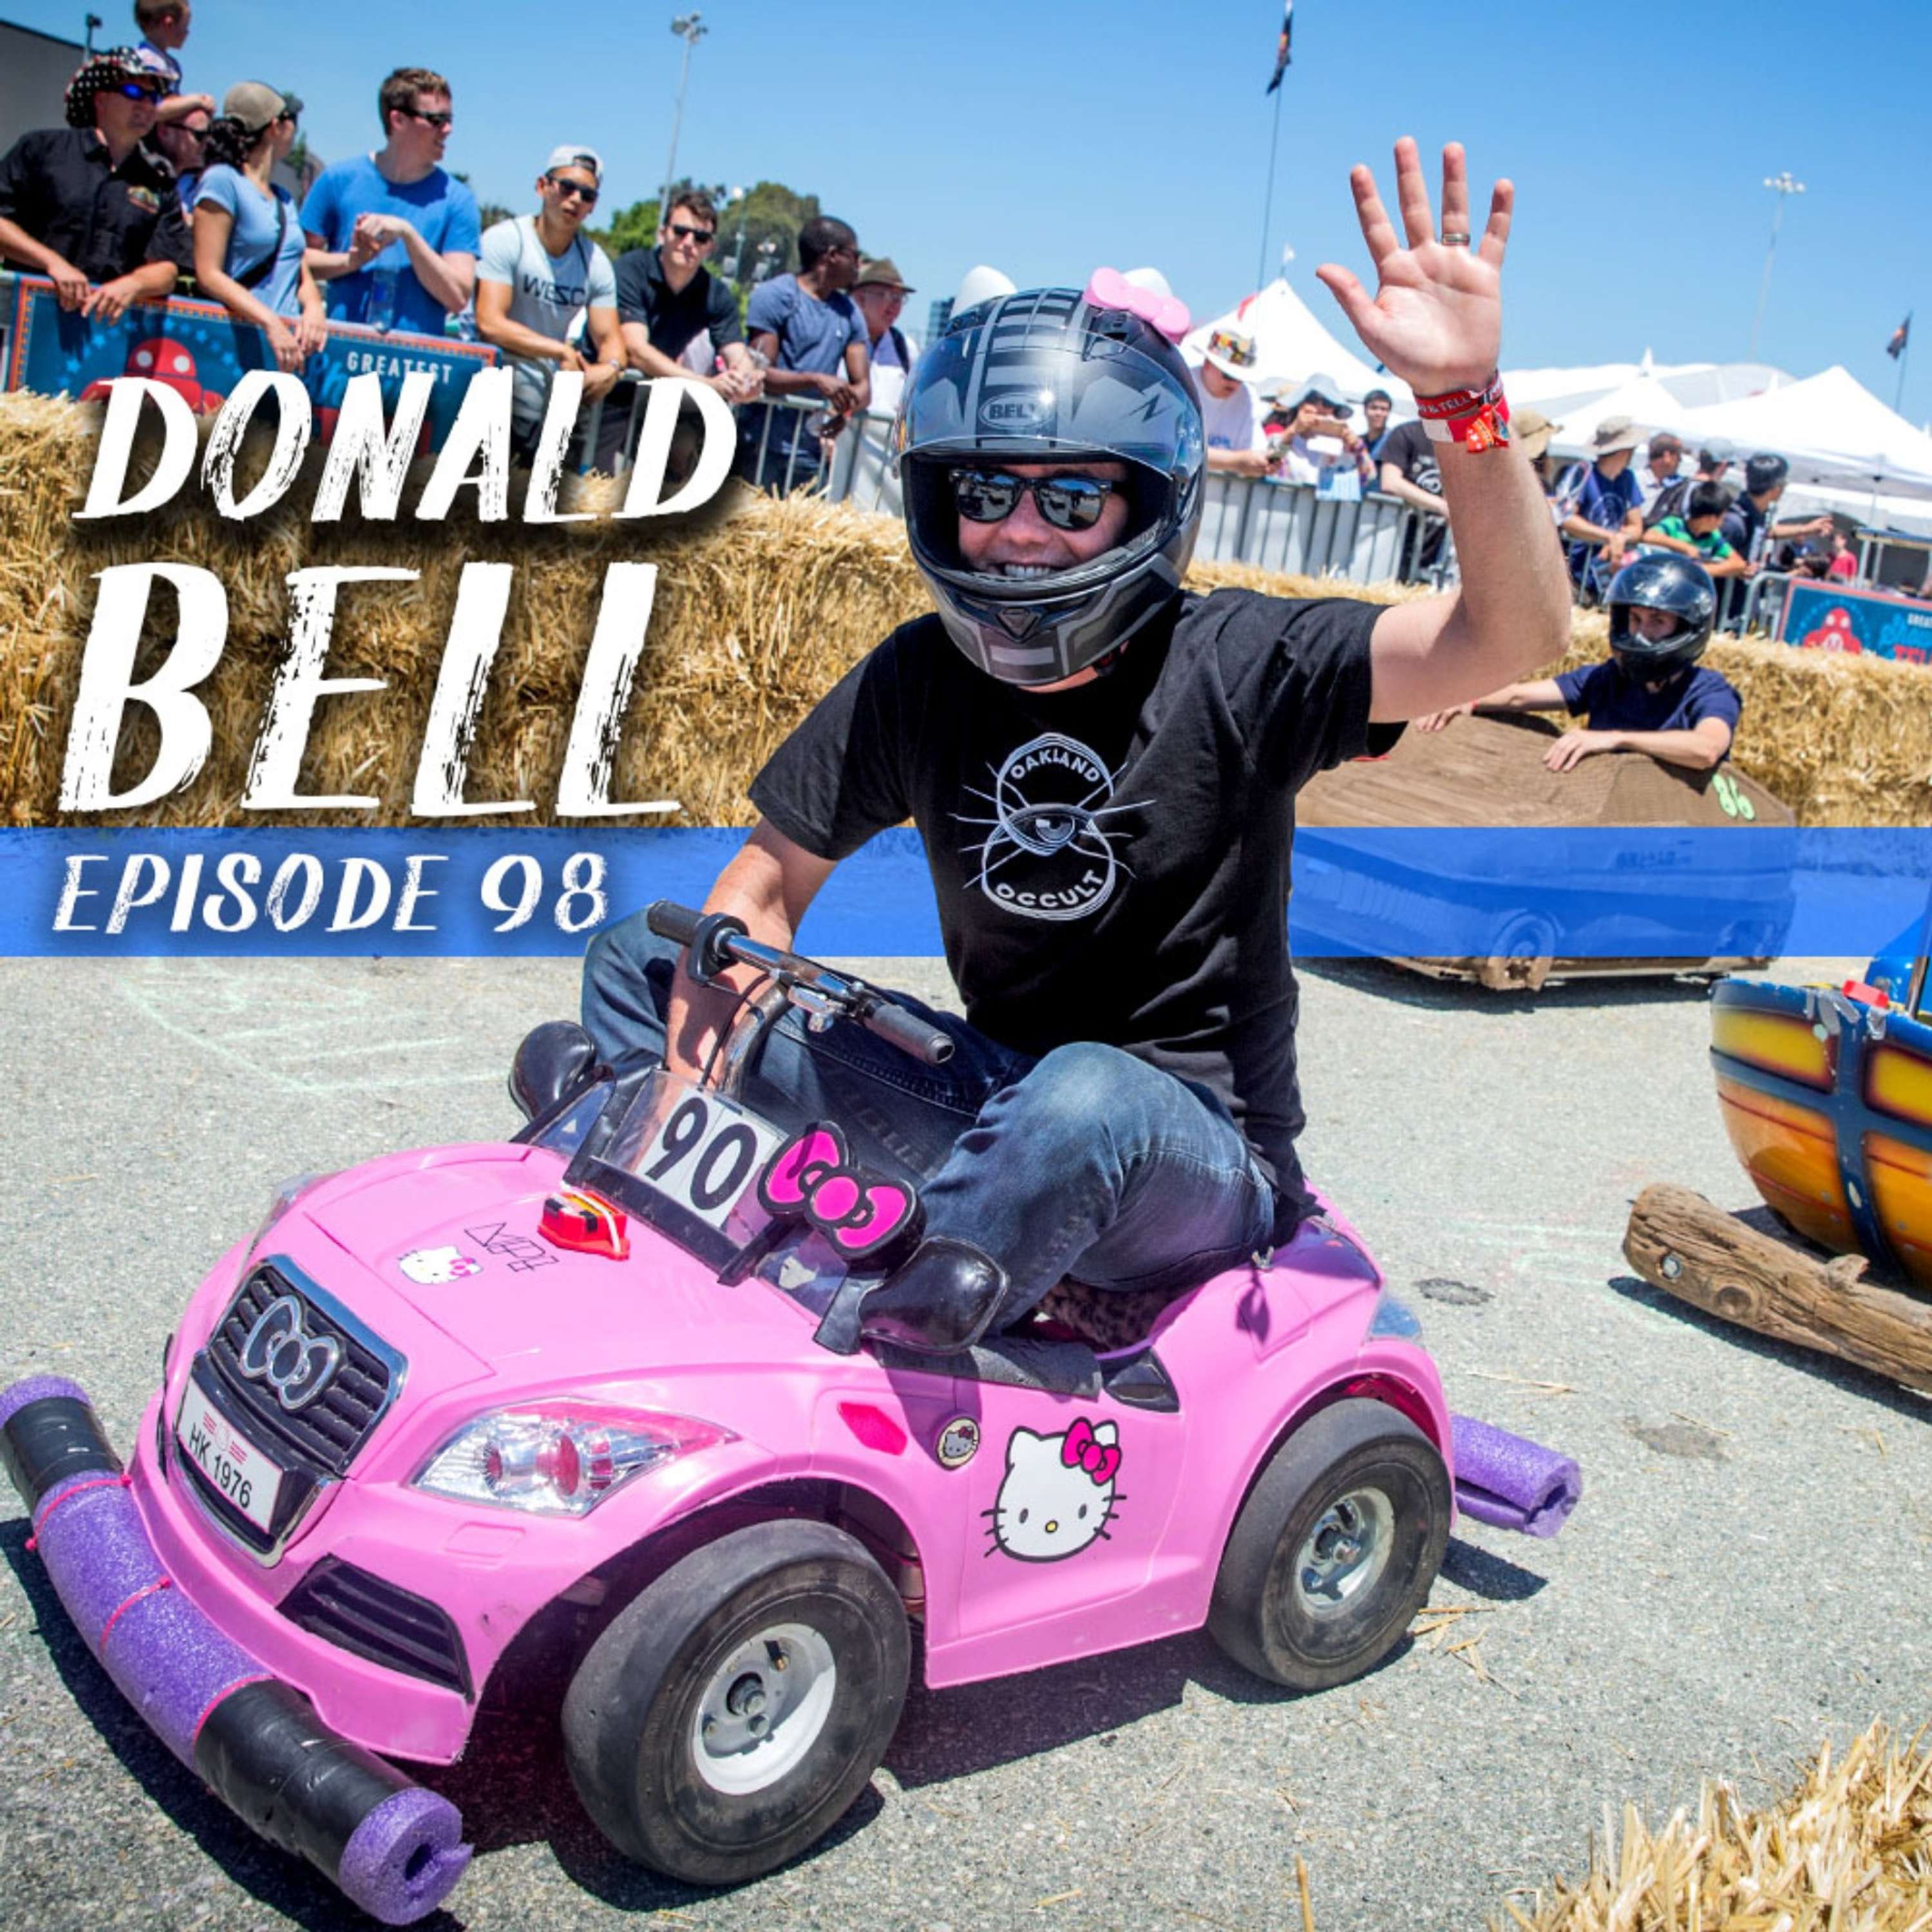 Covering the World of Making with Donald Bell